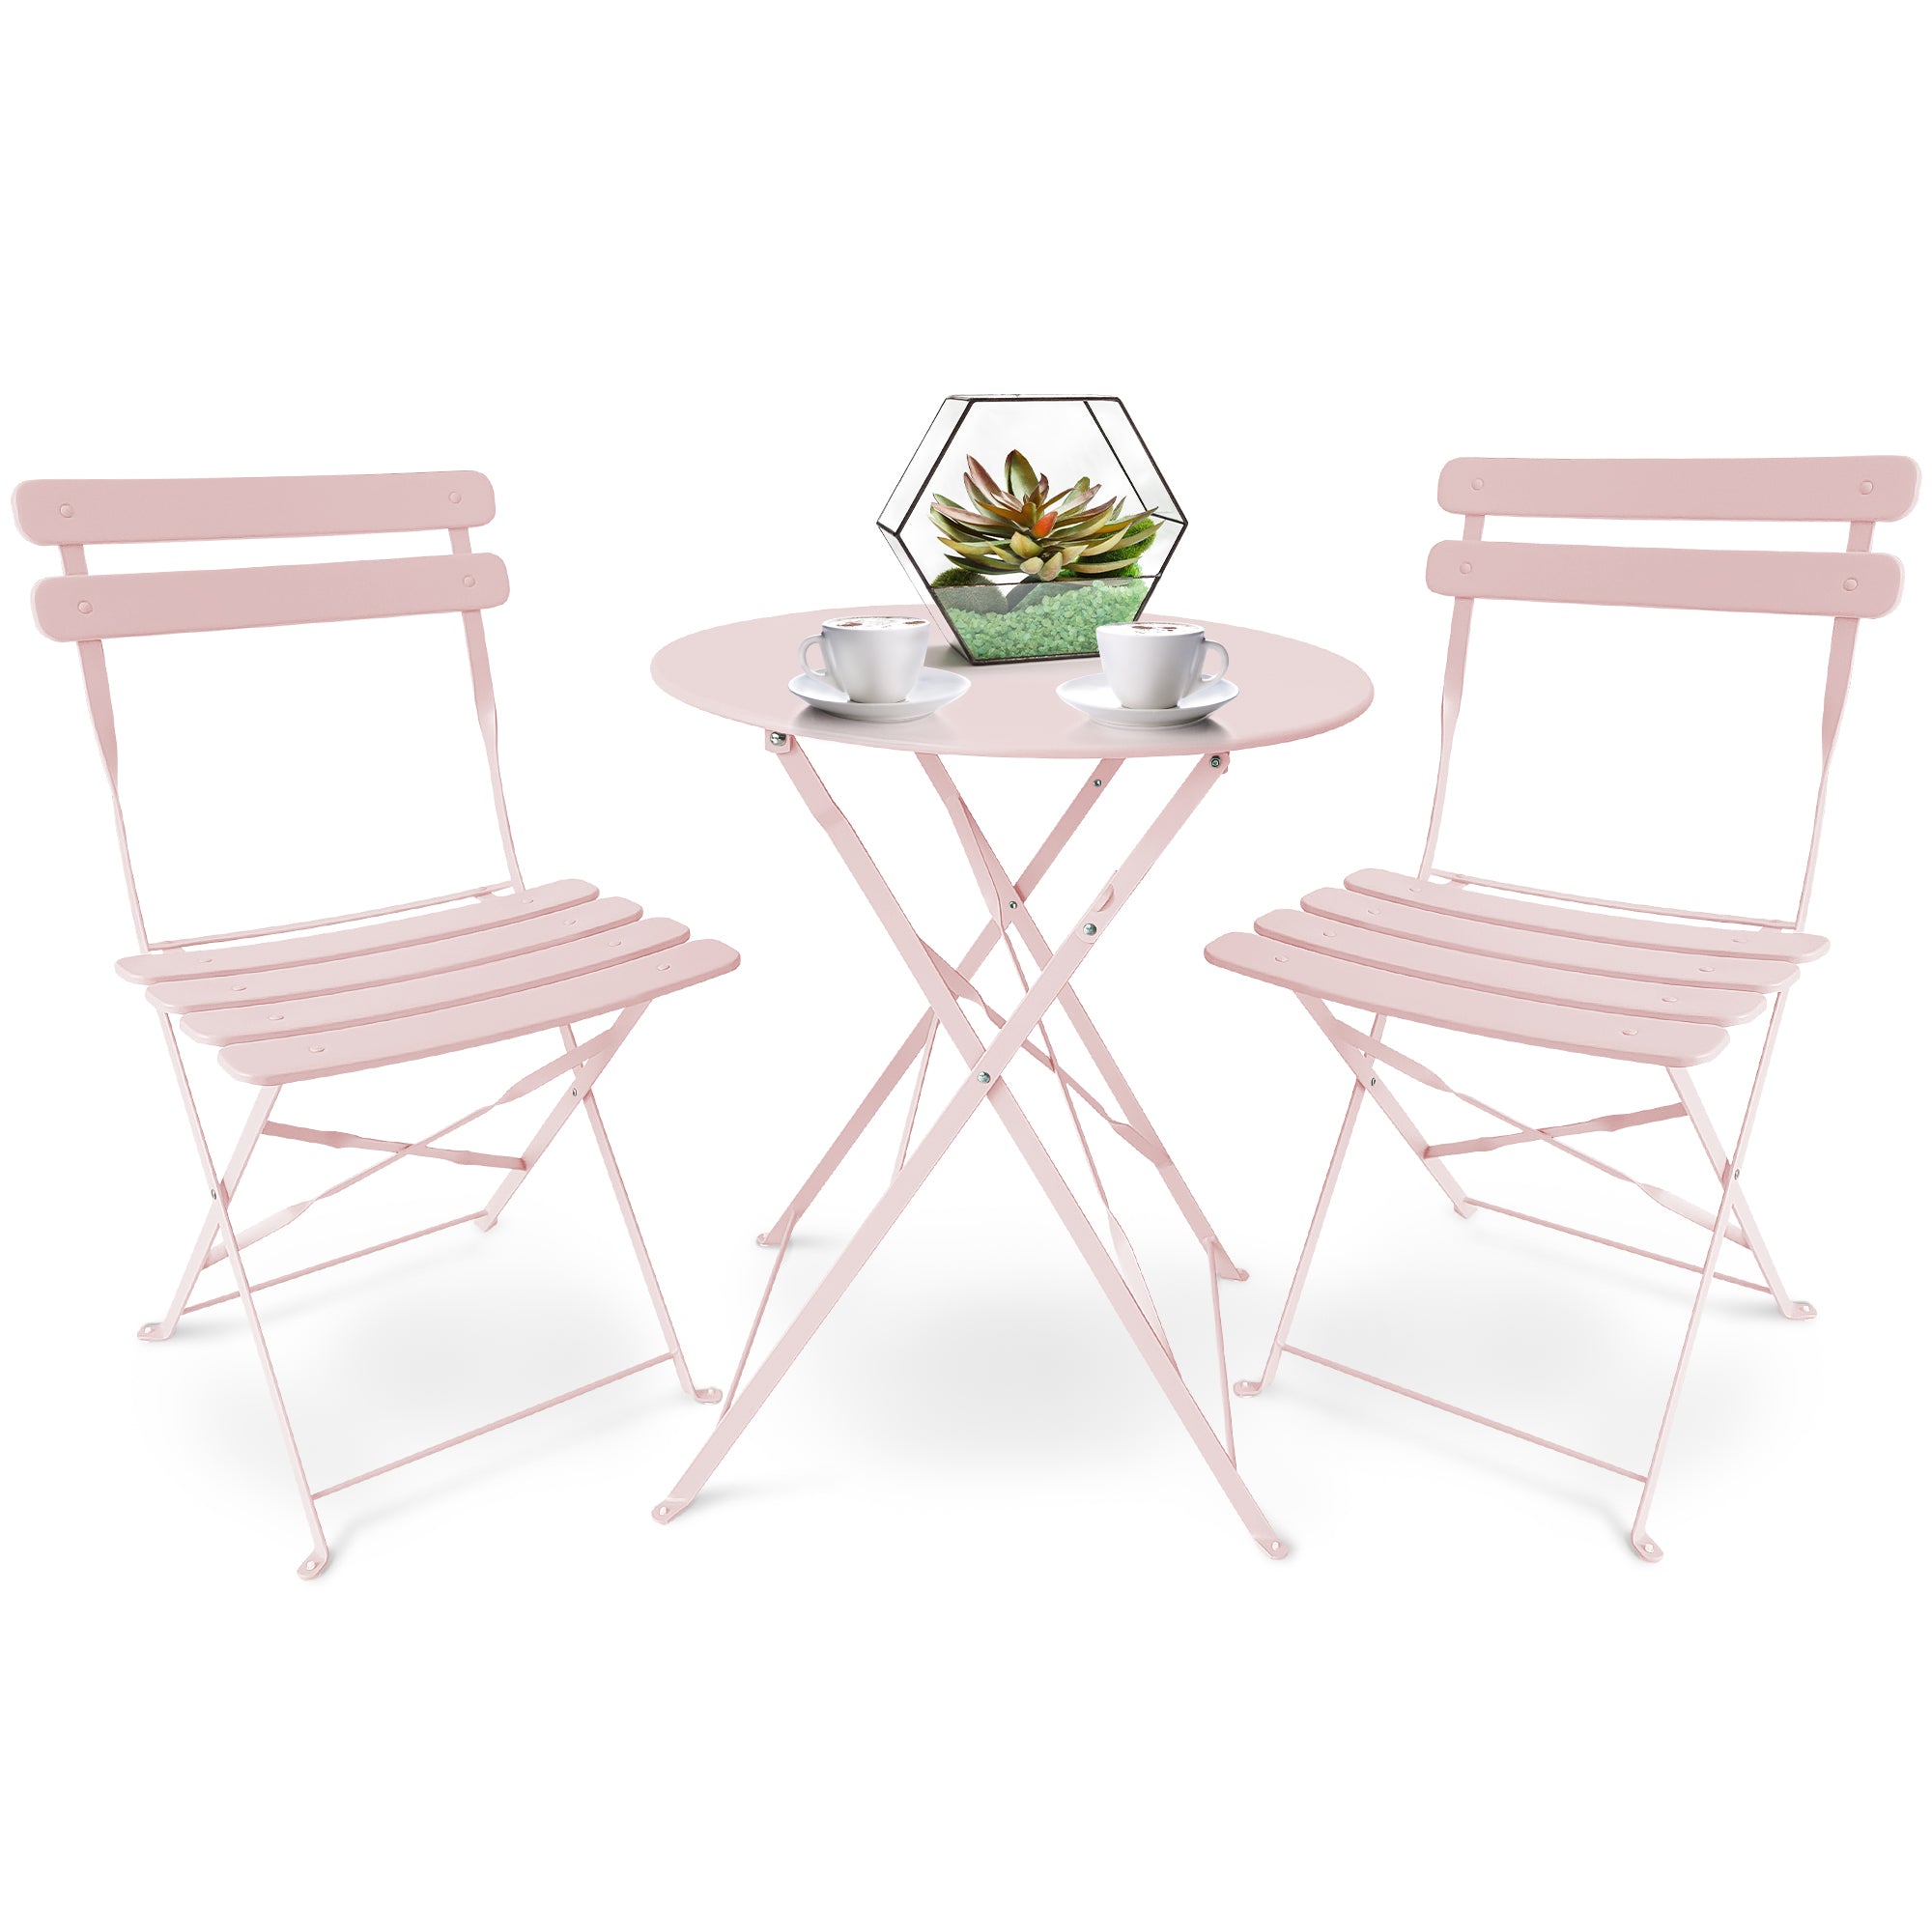 SUNMER Bistro Table & Chairs Set - Pink